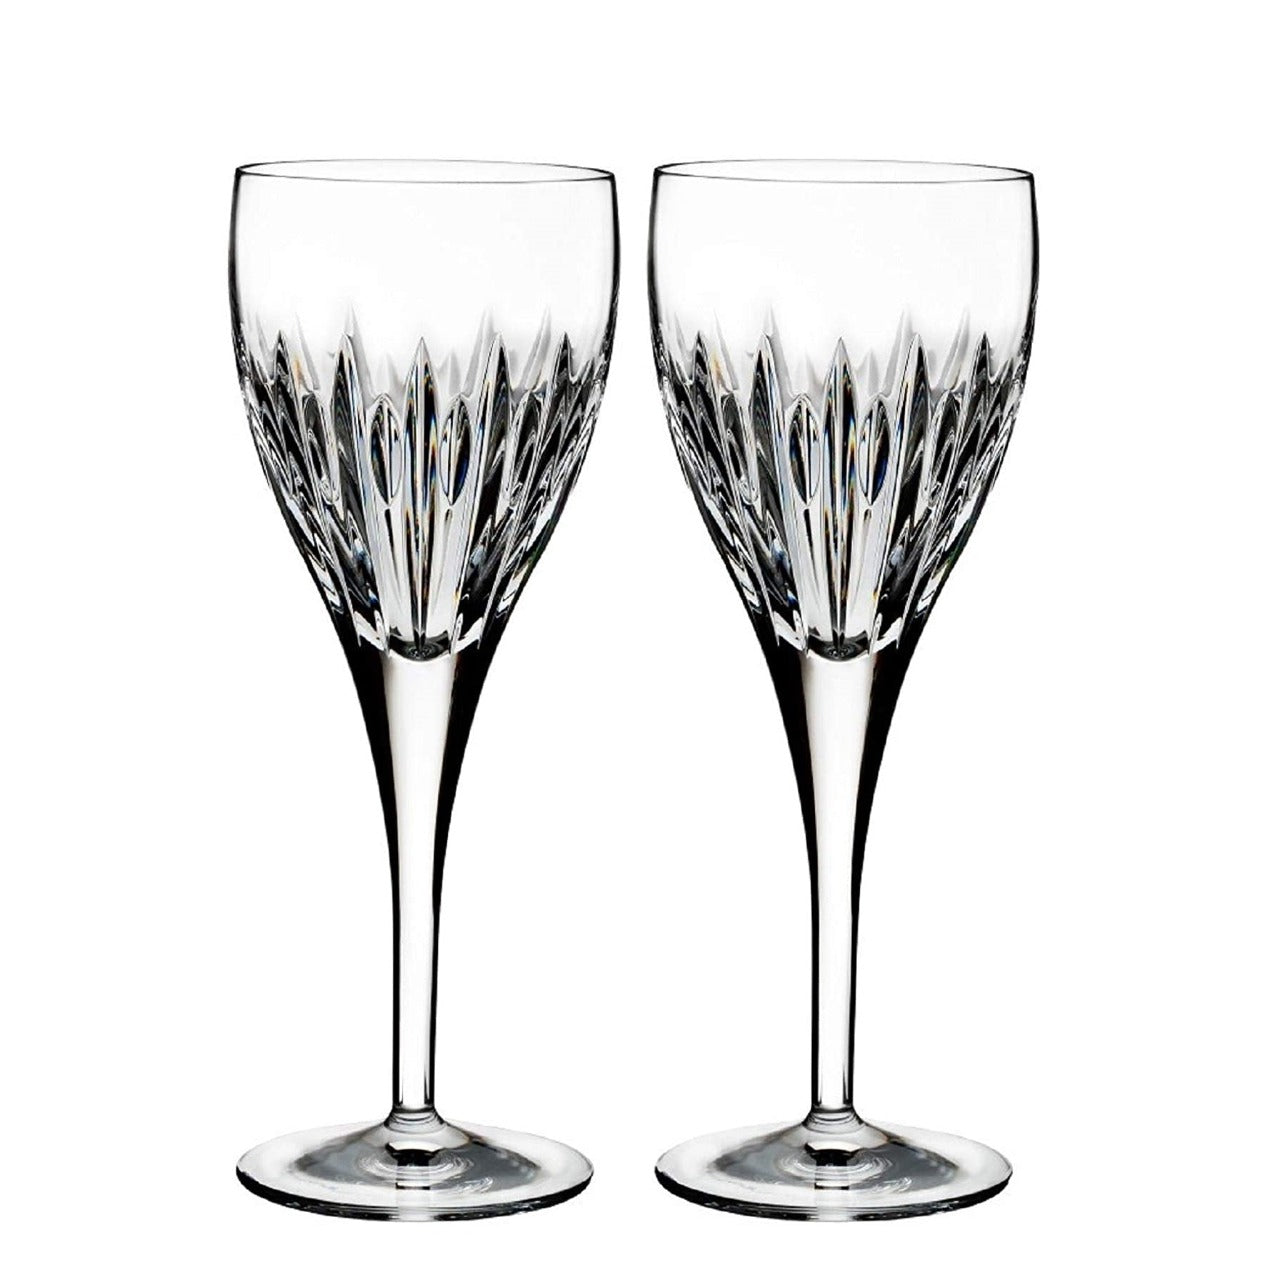 Waterford Crystal Ardan Mara Wine Glass Pair  Waterford Ardan offers the beauty of simplicity with the Mara pattern. Mara is the Irish meaning for sea and is inspired by the wild Atlantic Ocean with long and short deep vertical cuts. The Mara Wine Set is perfect for every day use.